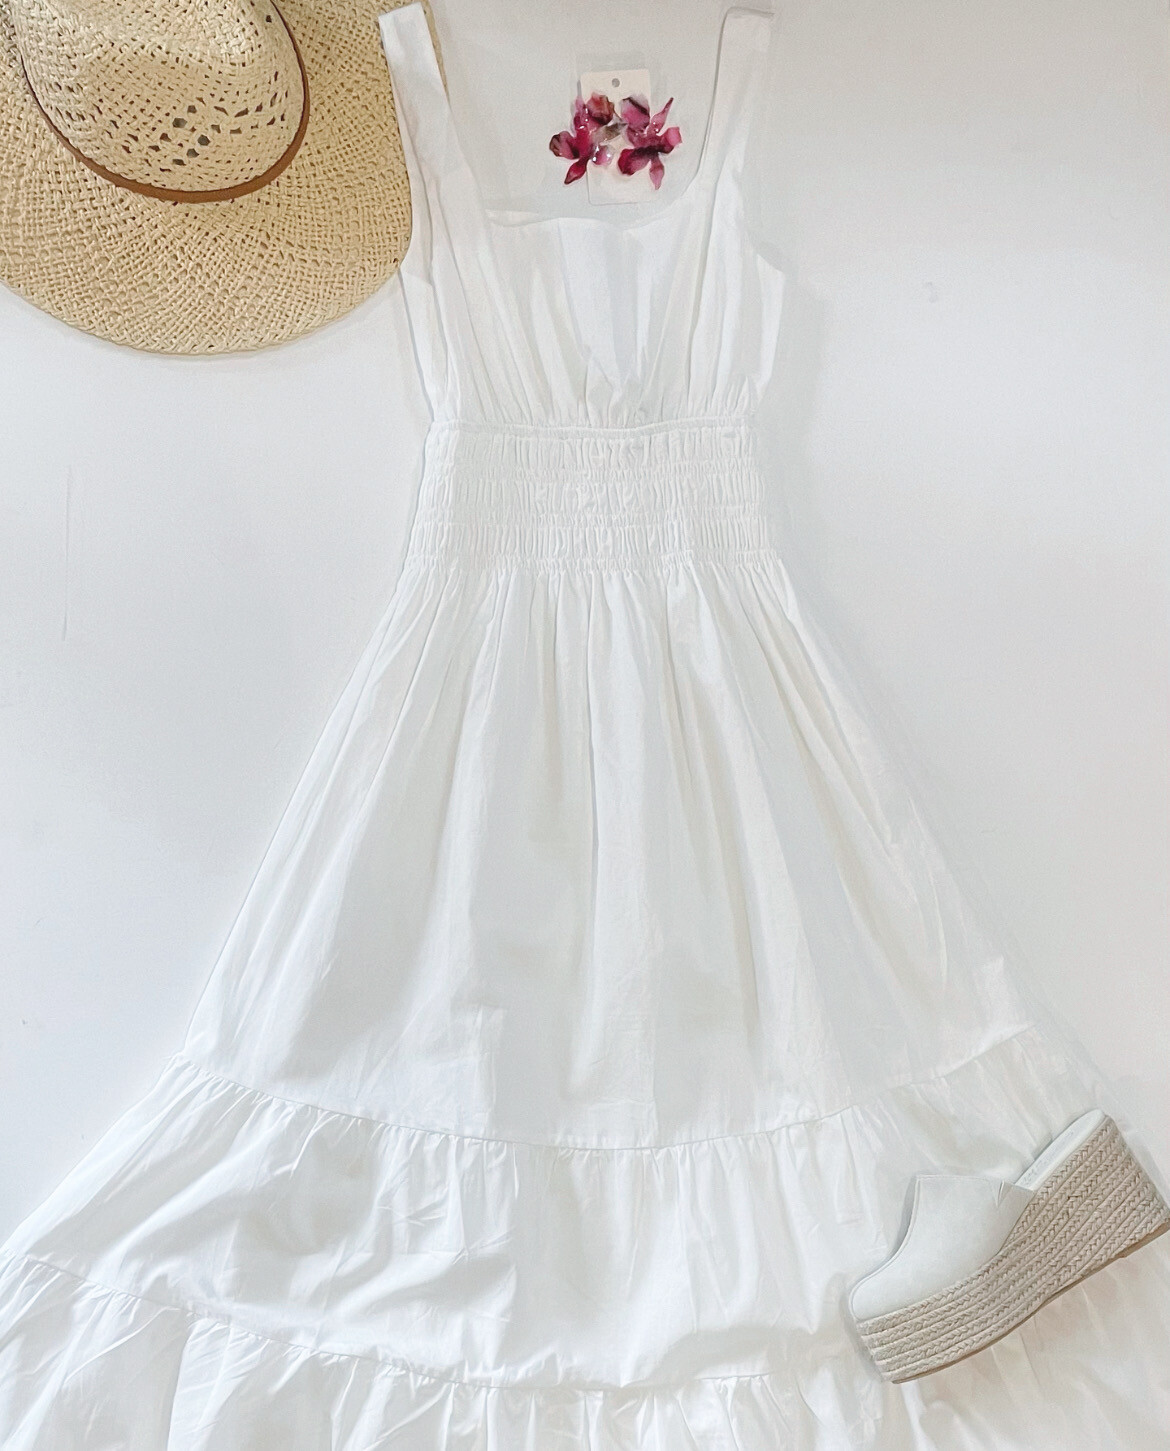 Sweet Cotton Ankle Dress